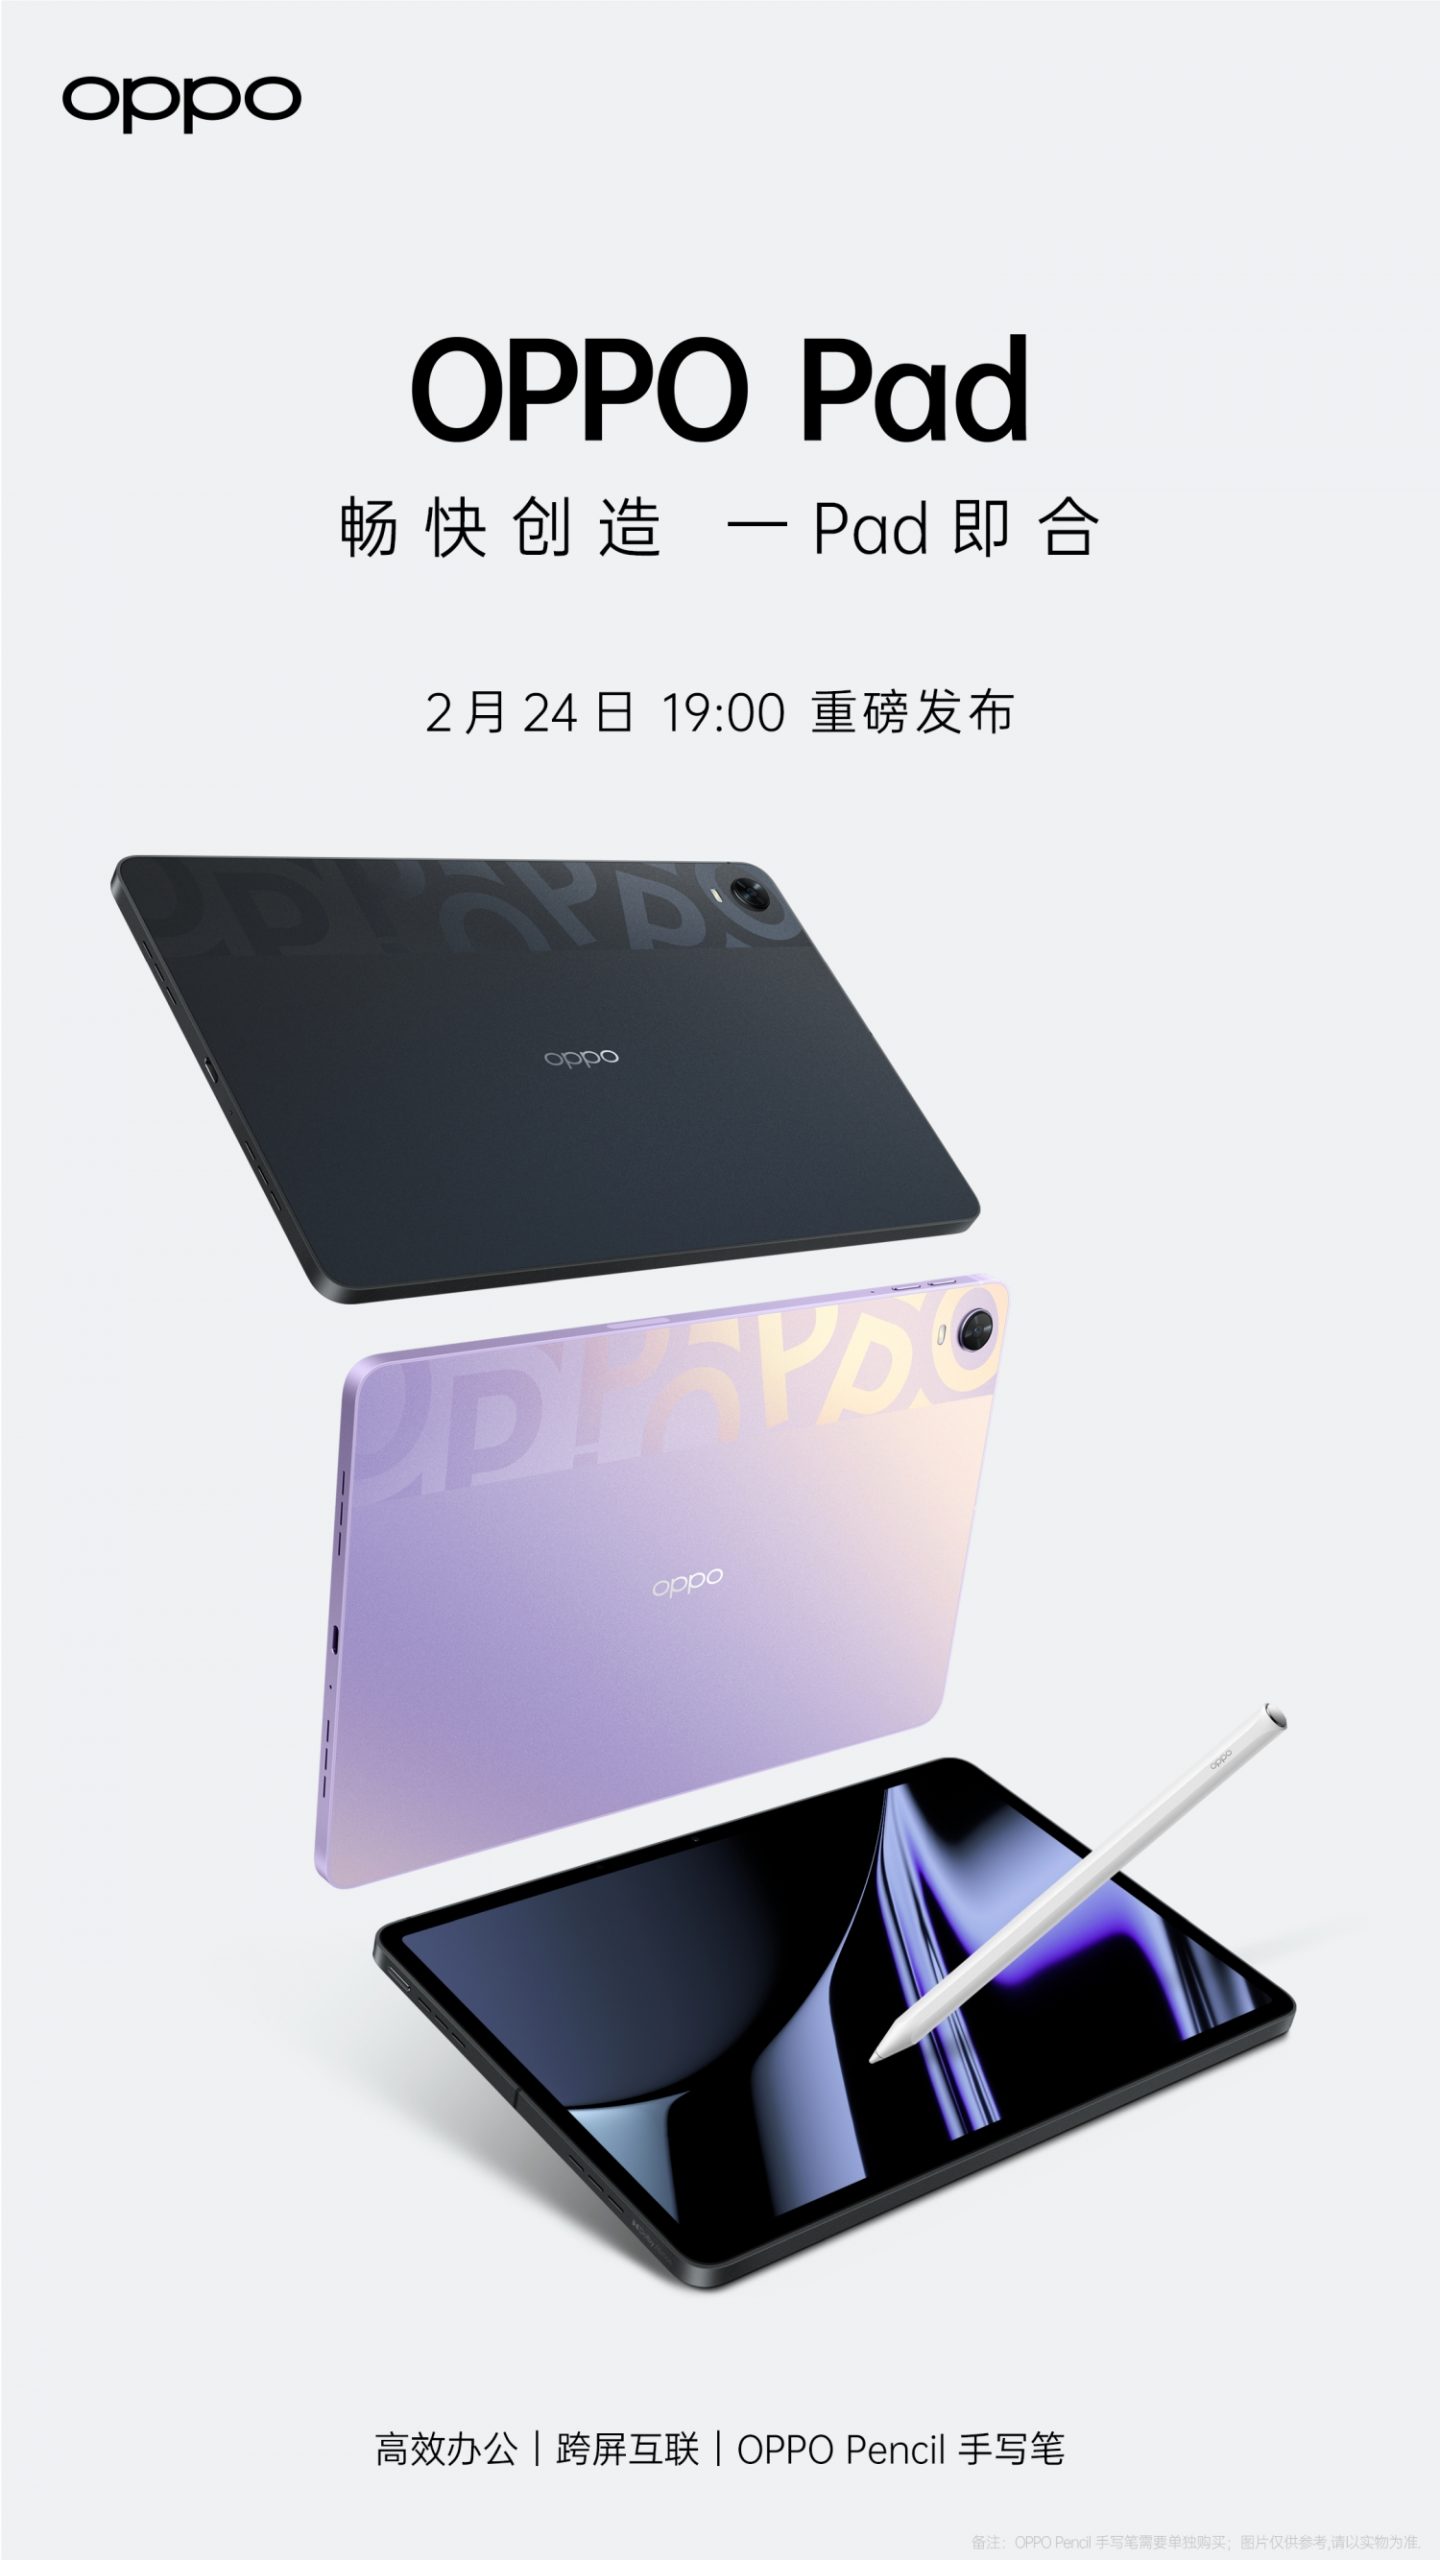 Oppo's first tablet revealed, featuring a Snapdragon 870 and it comes with  an Oppo Pencil - SoyaCincau